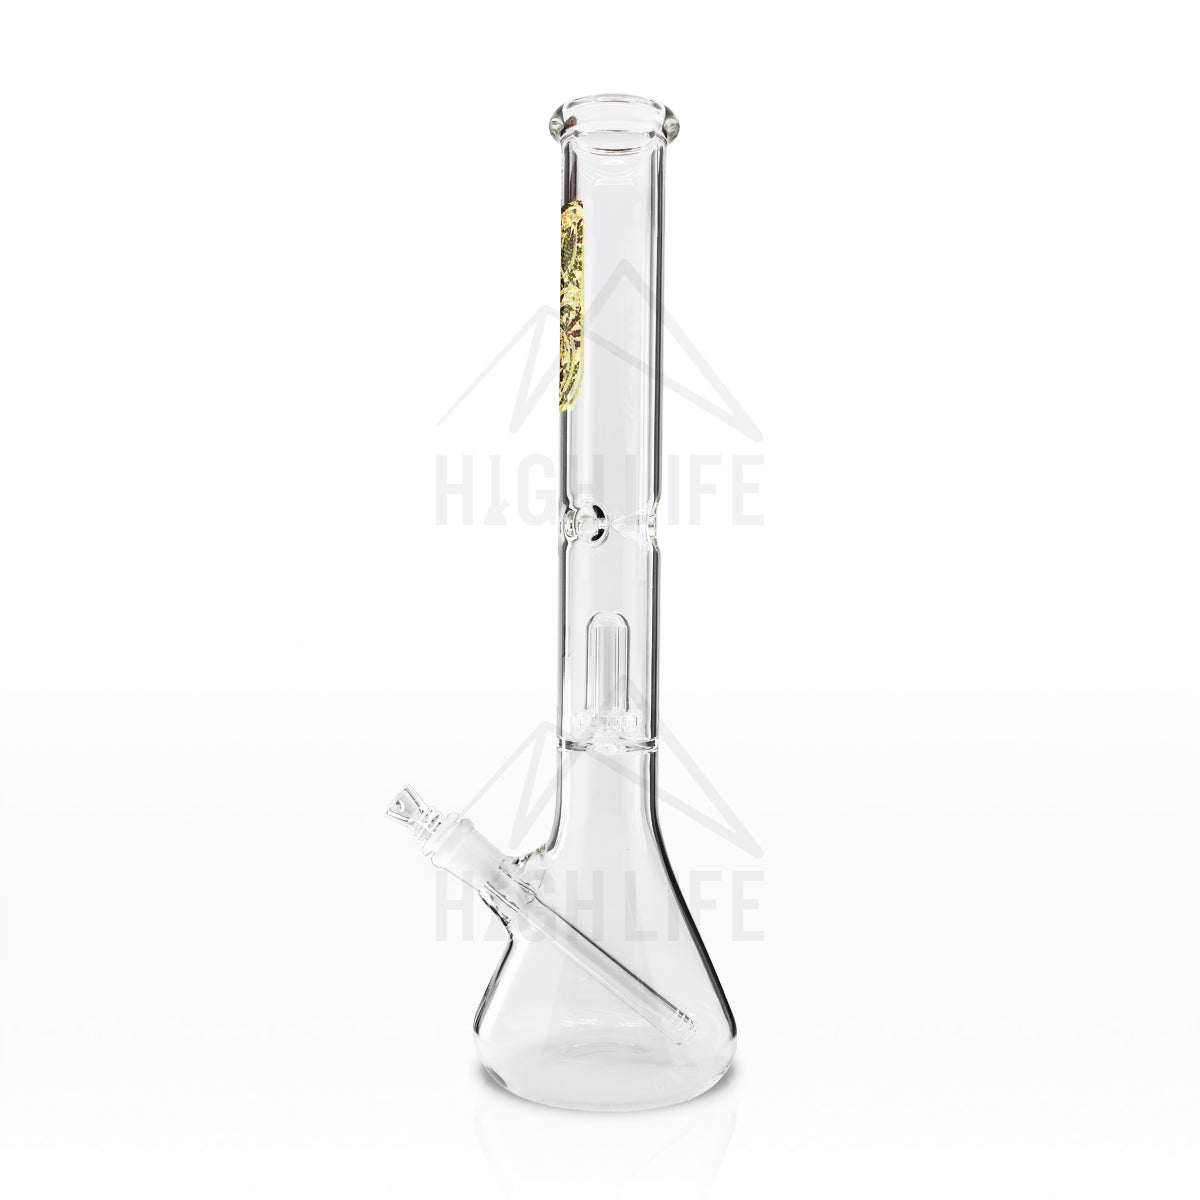 Colored Showerhead Percolator Water Pipe - Banger - 6 - IAI Corporation -  Wholesale Glass Pipes & Smoking Accessories